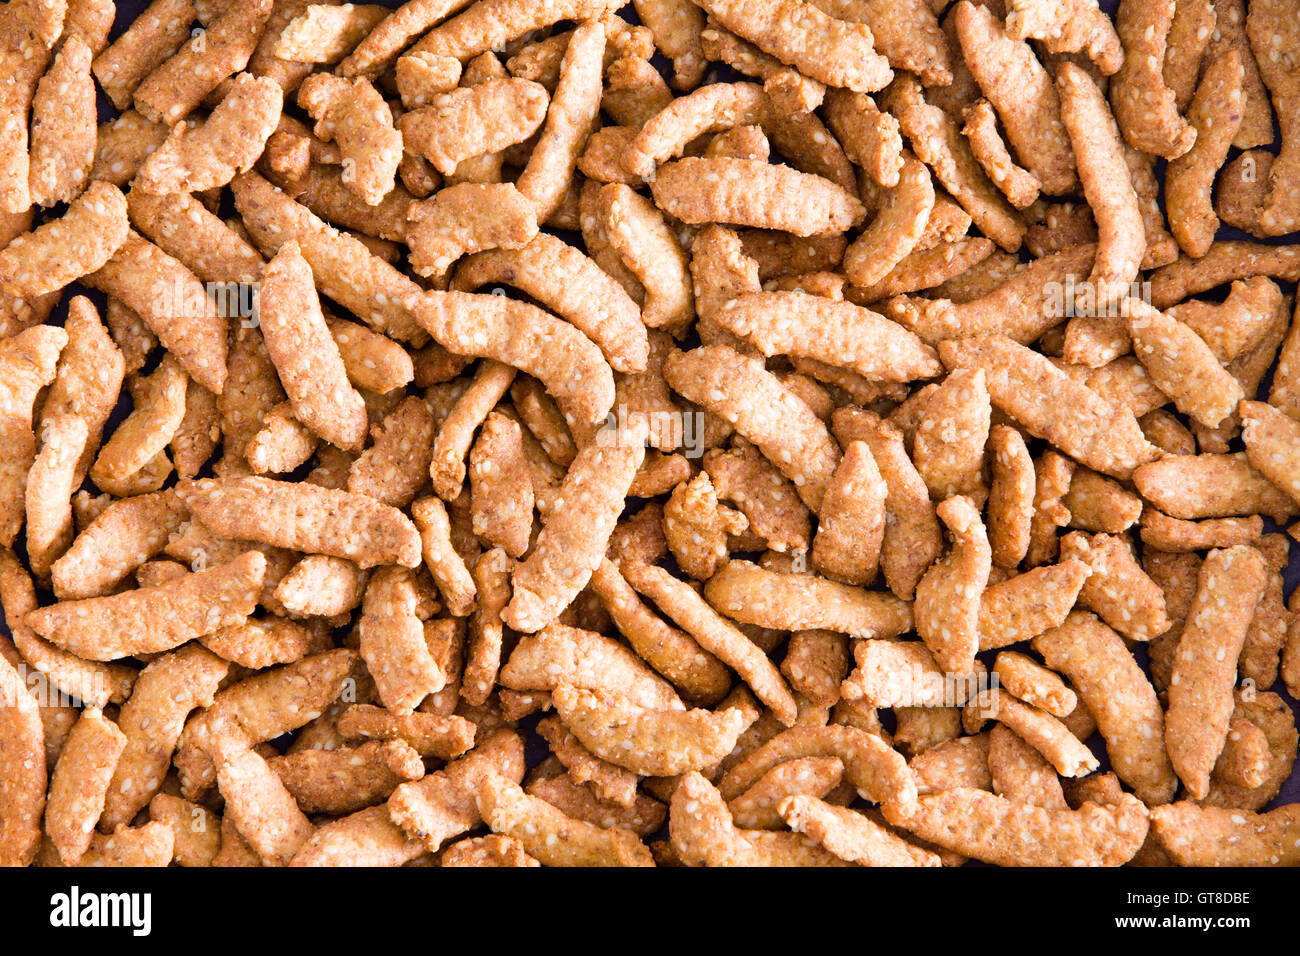 Background texture of healthy crunchy sesame seed sticks for a tasty nutty flavored snack or appetizer Stock Photo